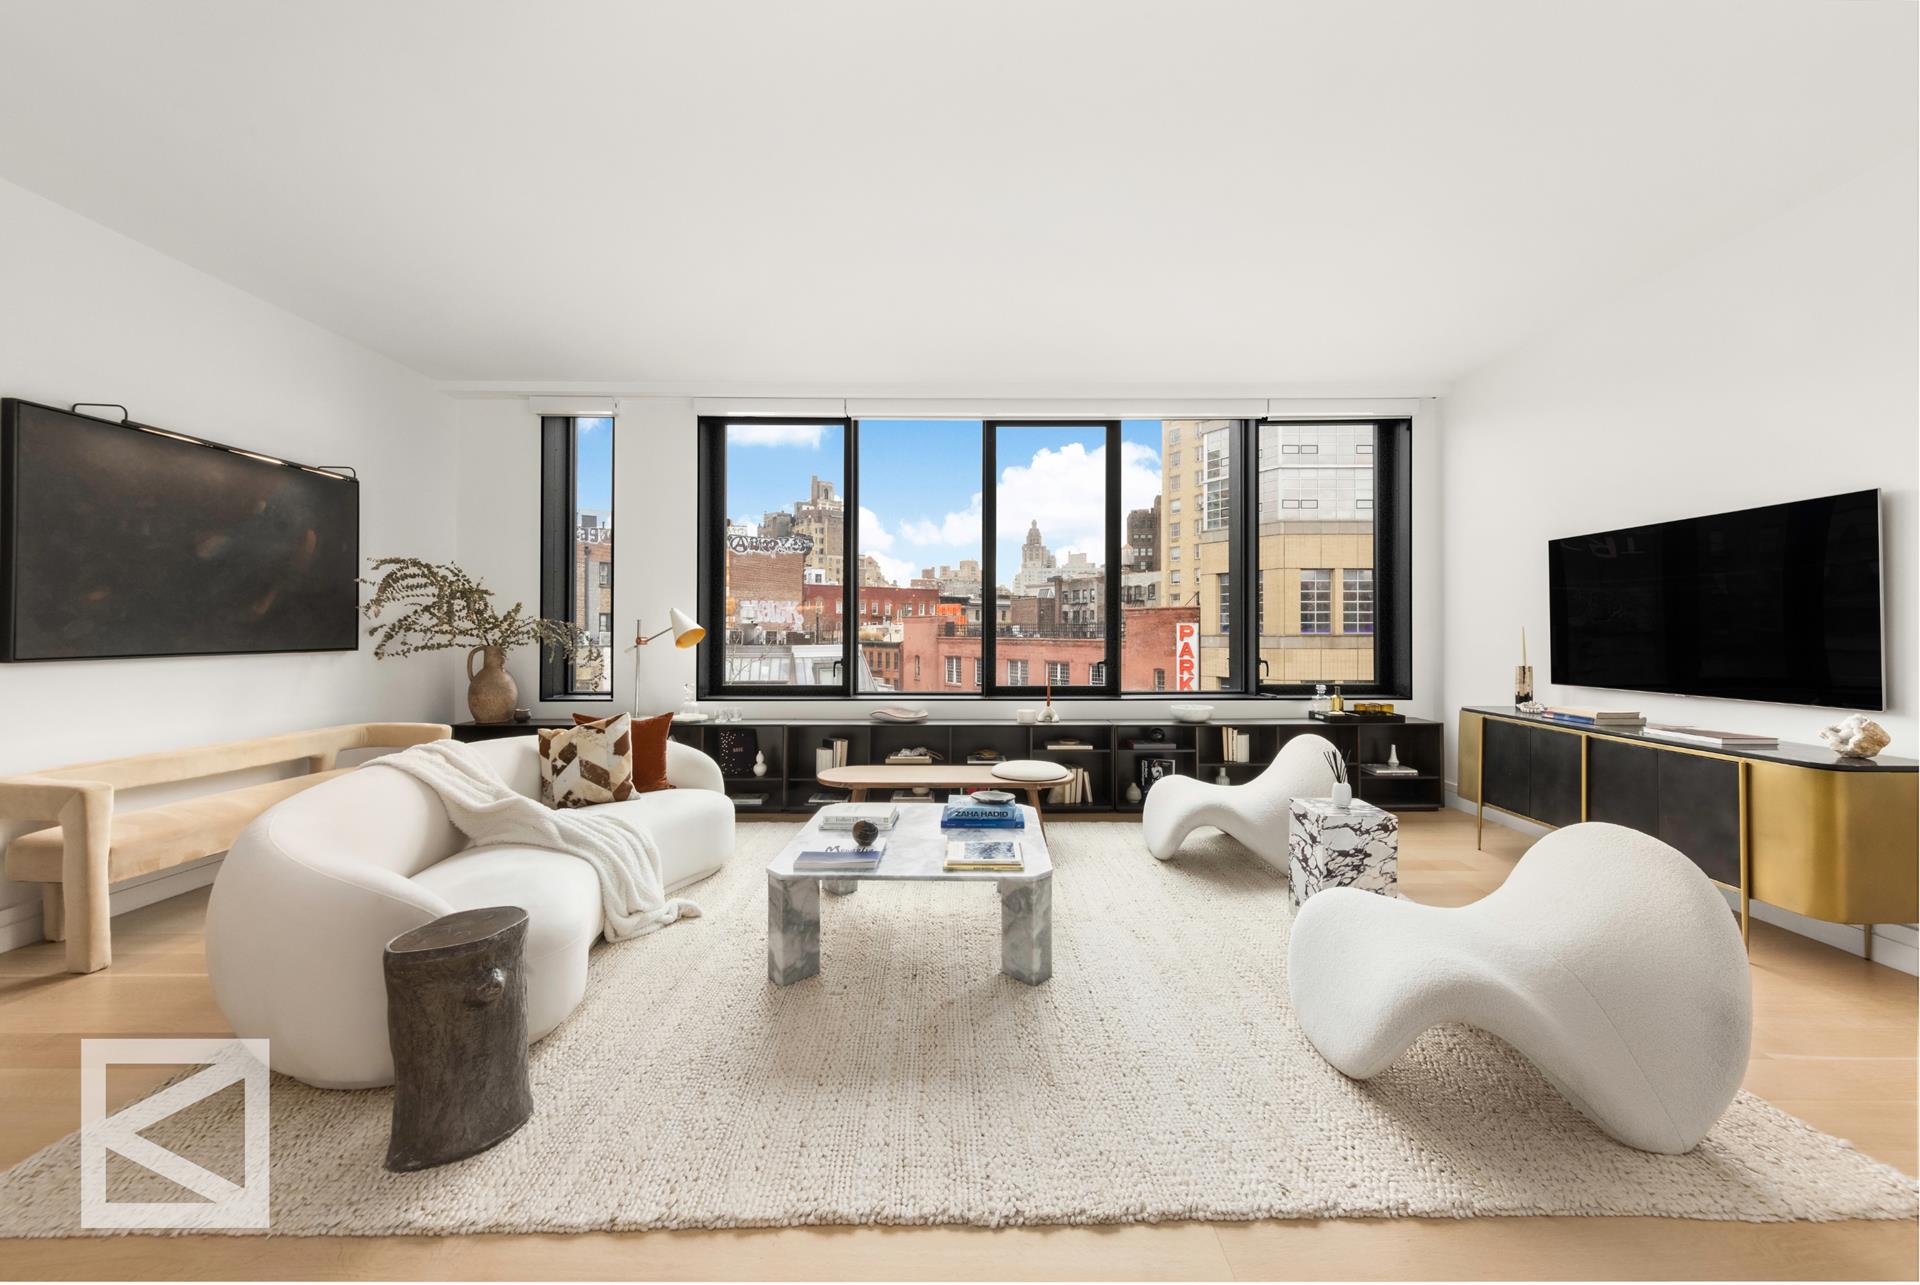 175 West 10th Street 4, West Village, Downtown, NYC - 3 Bedrooms  
3.5 Bathrooms  
9 Rooms - 